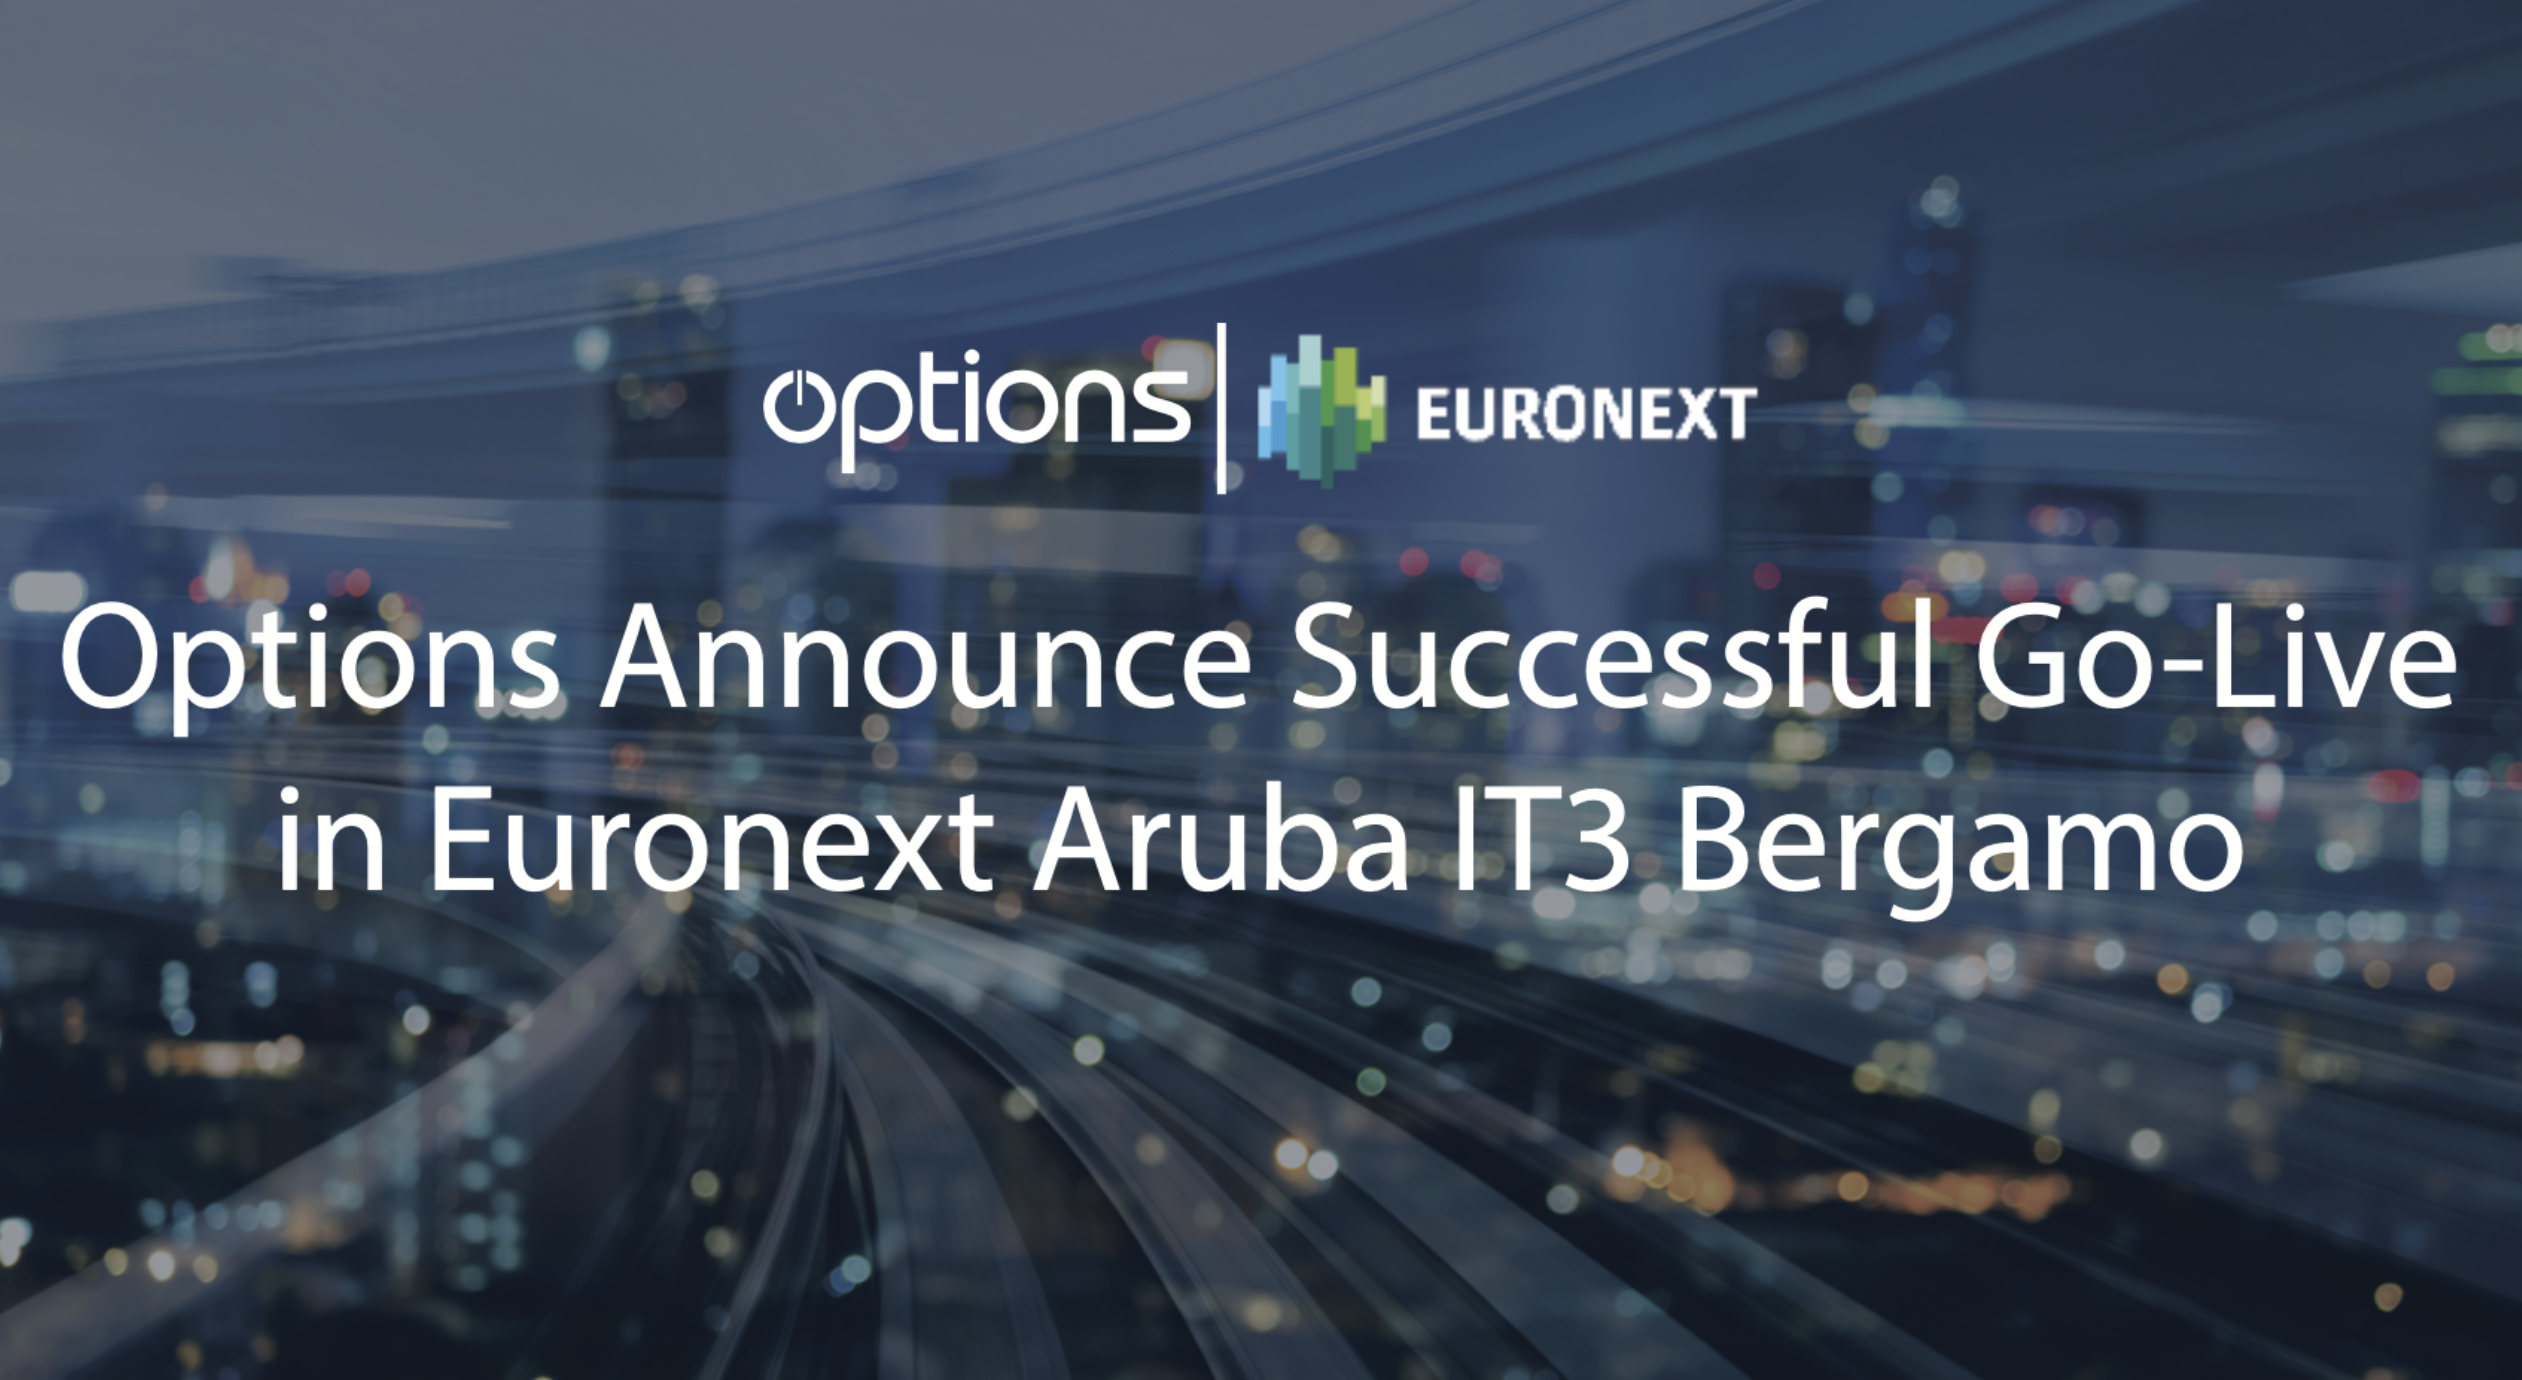 You are currently viewing Options Announce Successful Go-Live in Euronext Aruba IT3 Bergamo